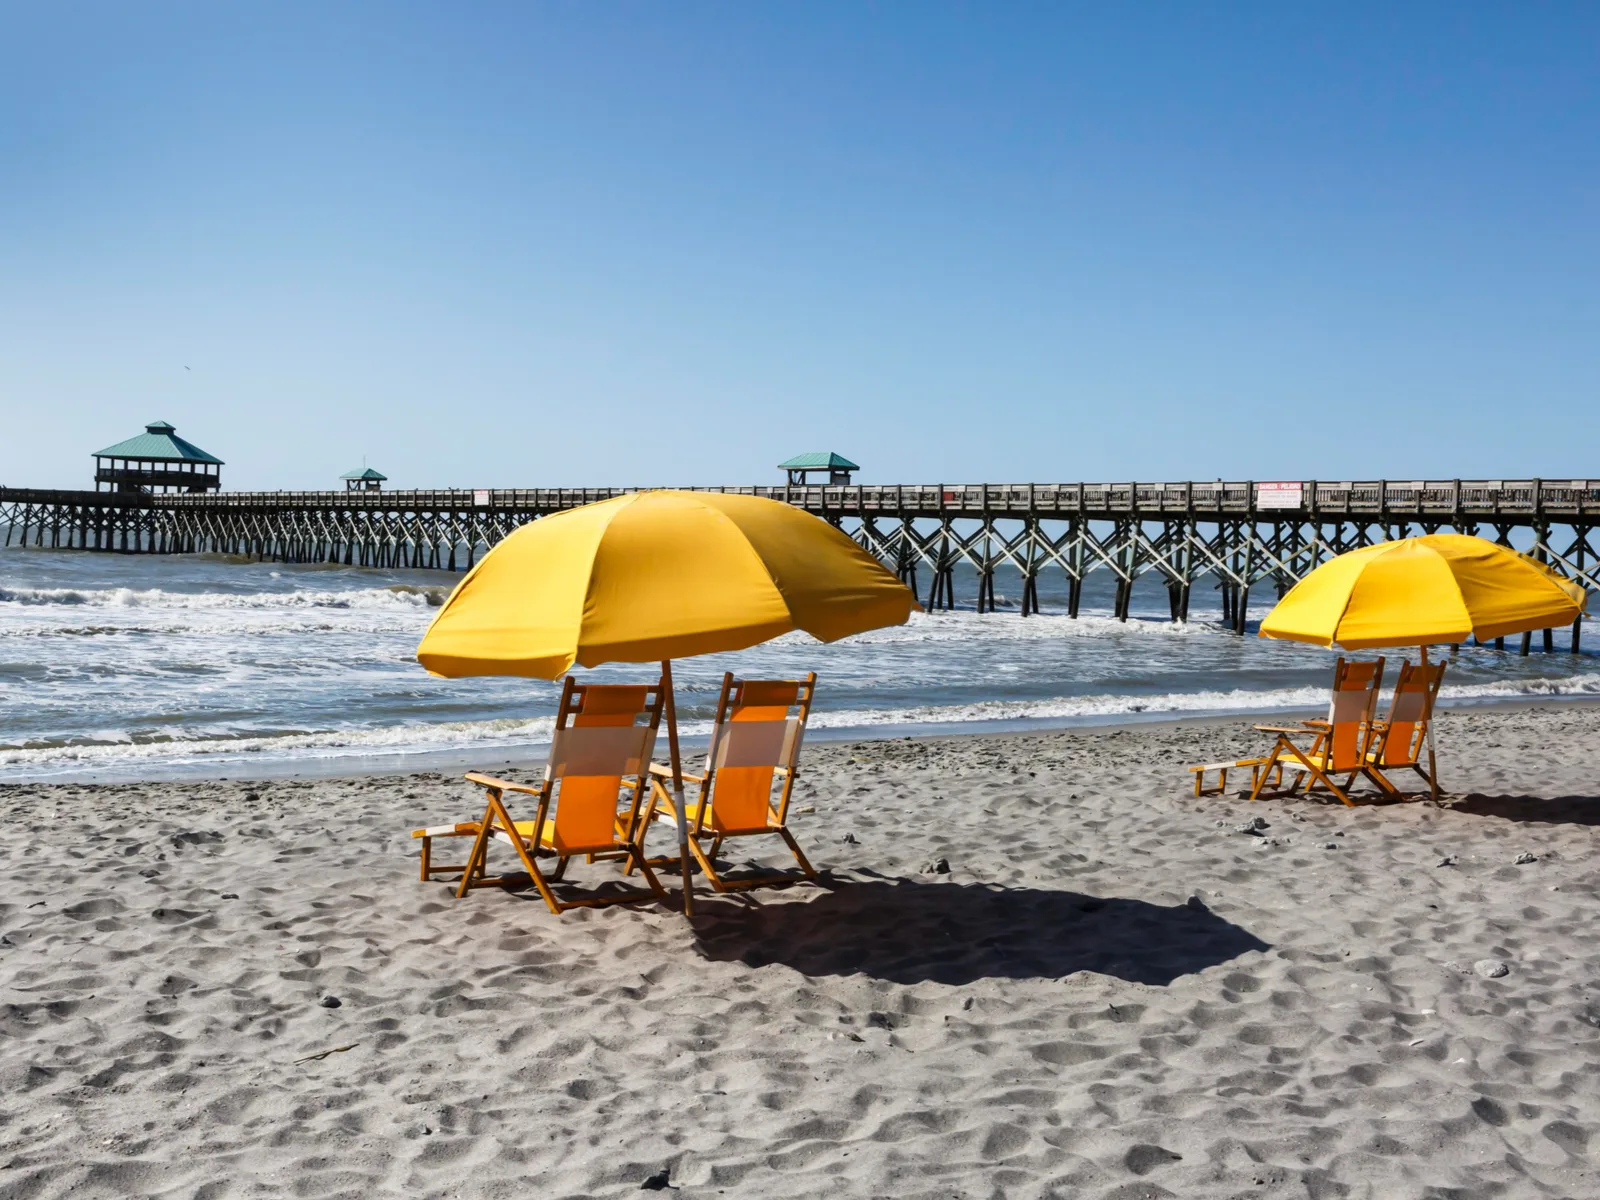 Empty yellow beach chair under umbrellas beside the famous tall boardwalk at Folly Beach in South Carolina, one of the best beaches on the East Coast